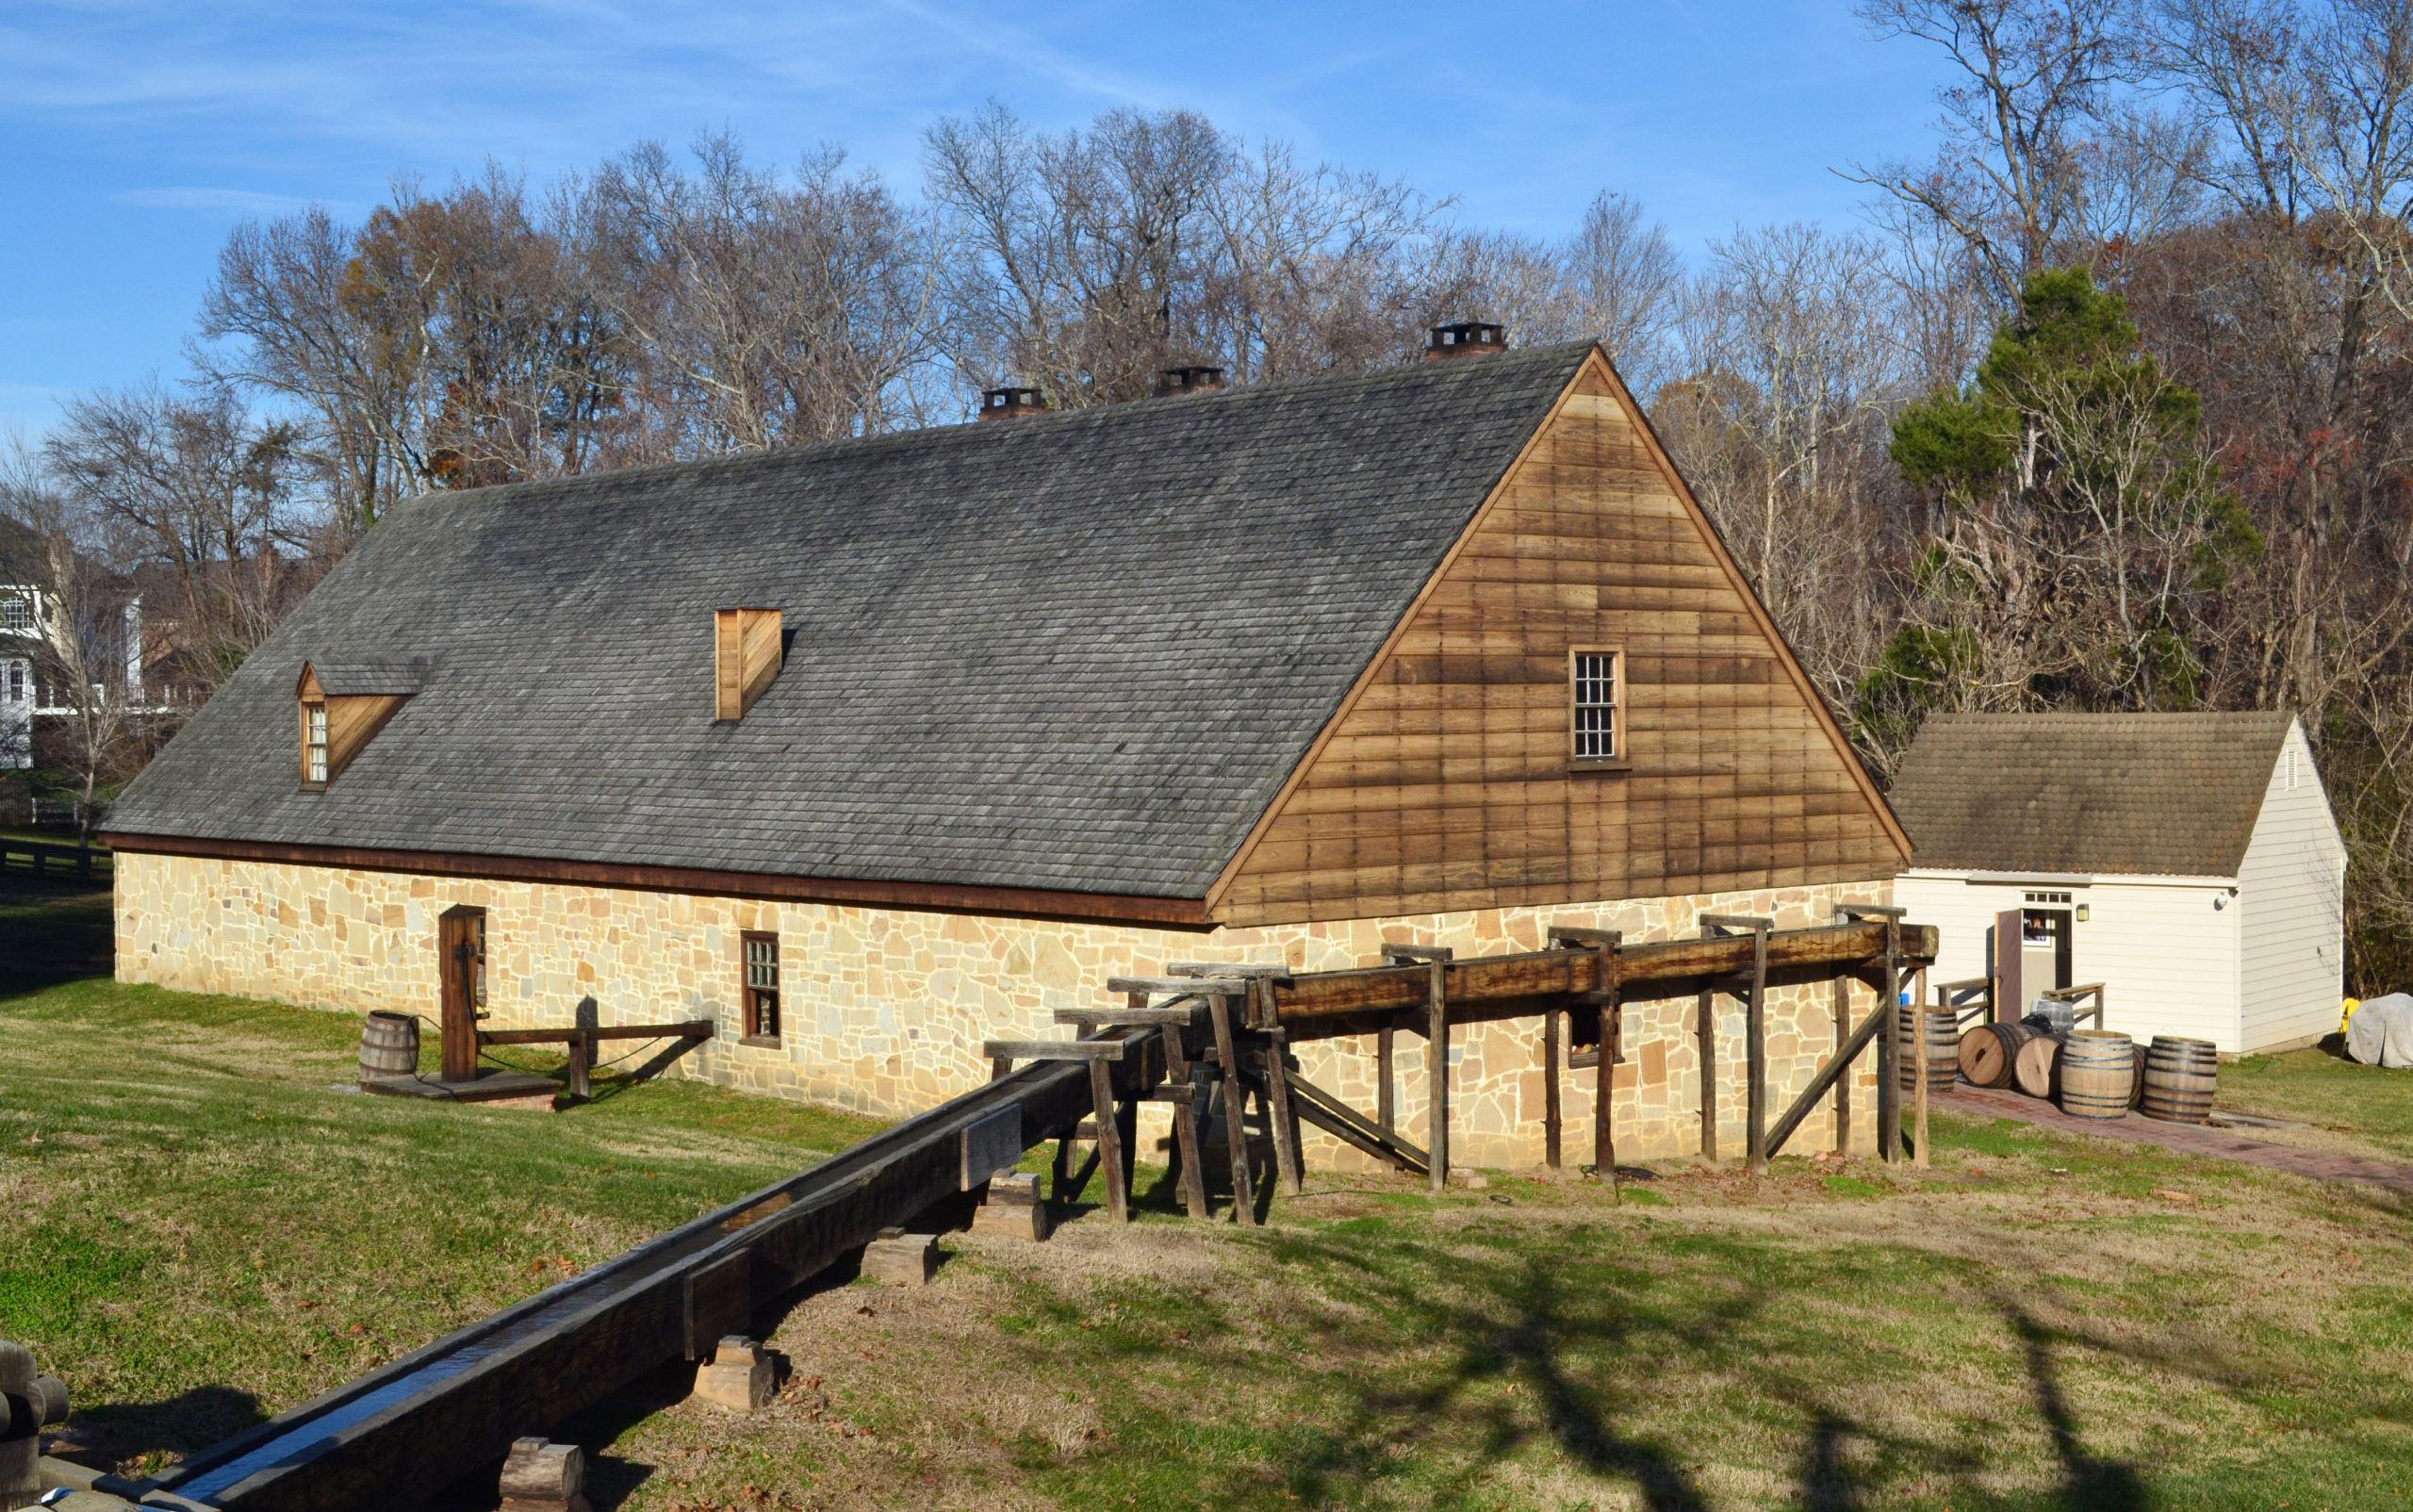 029-5181_Woodlawn_CL_HD_2018_Washington_Reconstructed_Distillery_VLR_Online-CLoth-scaled